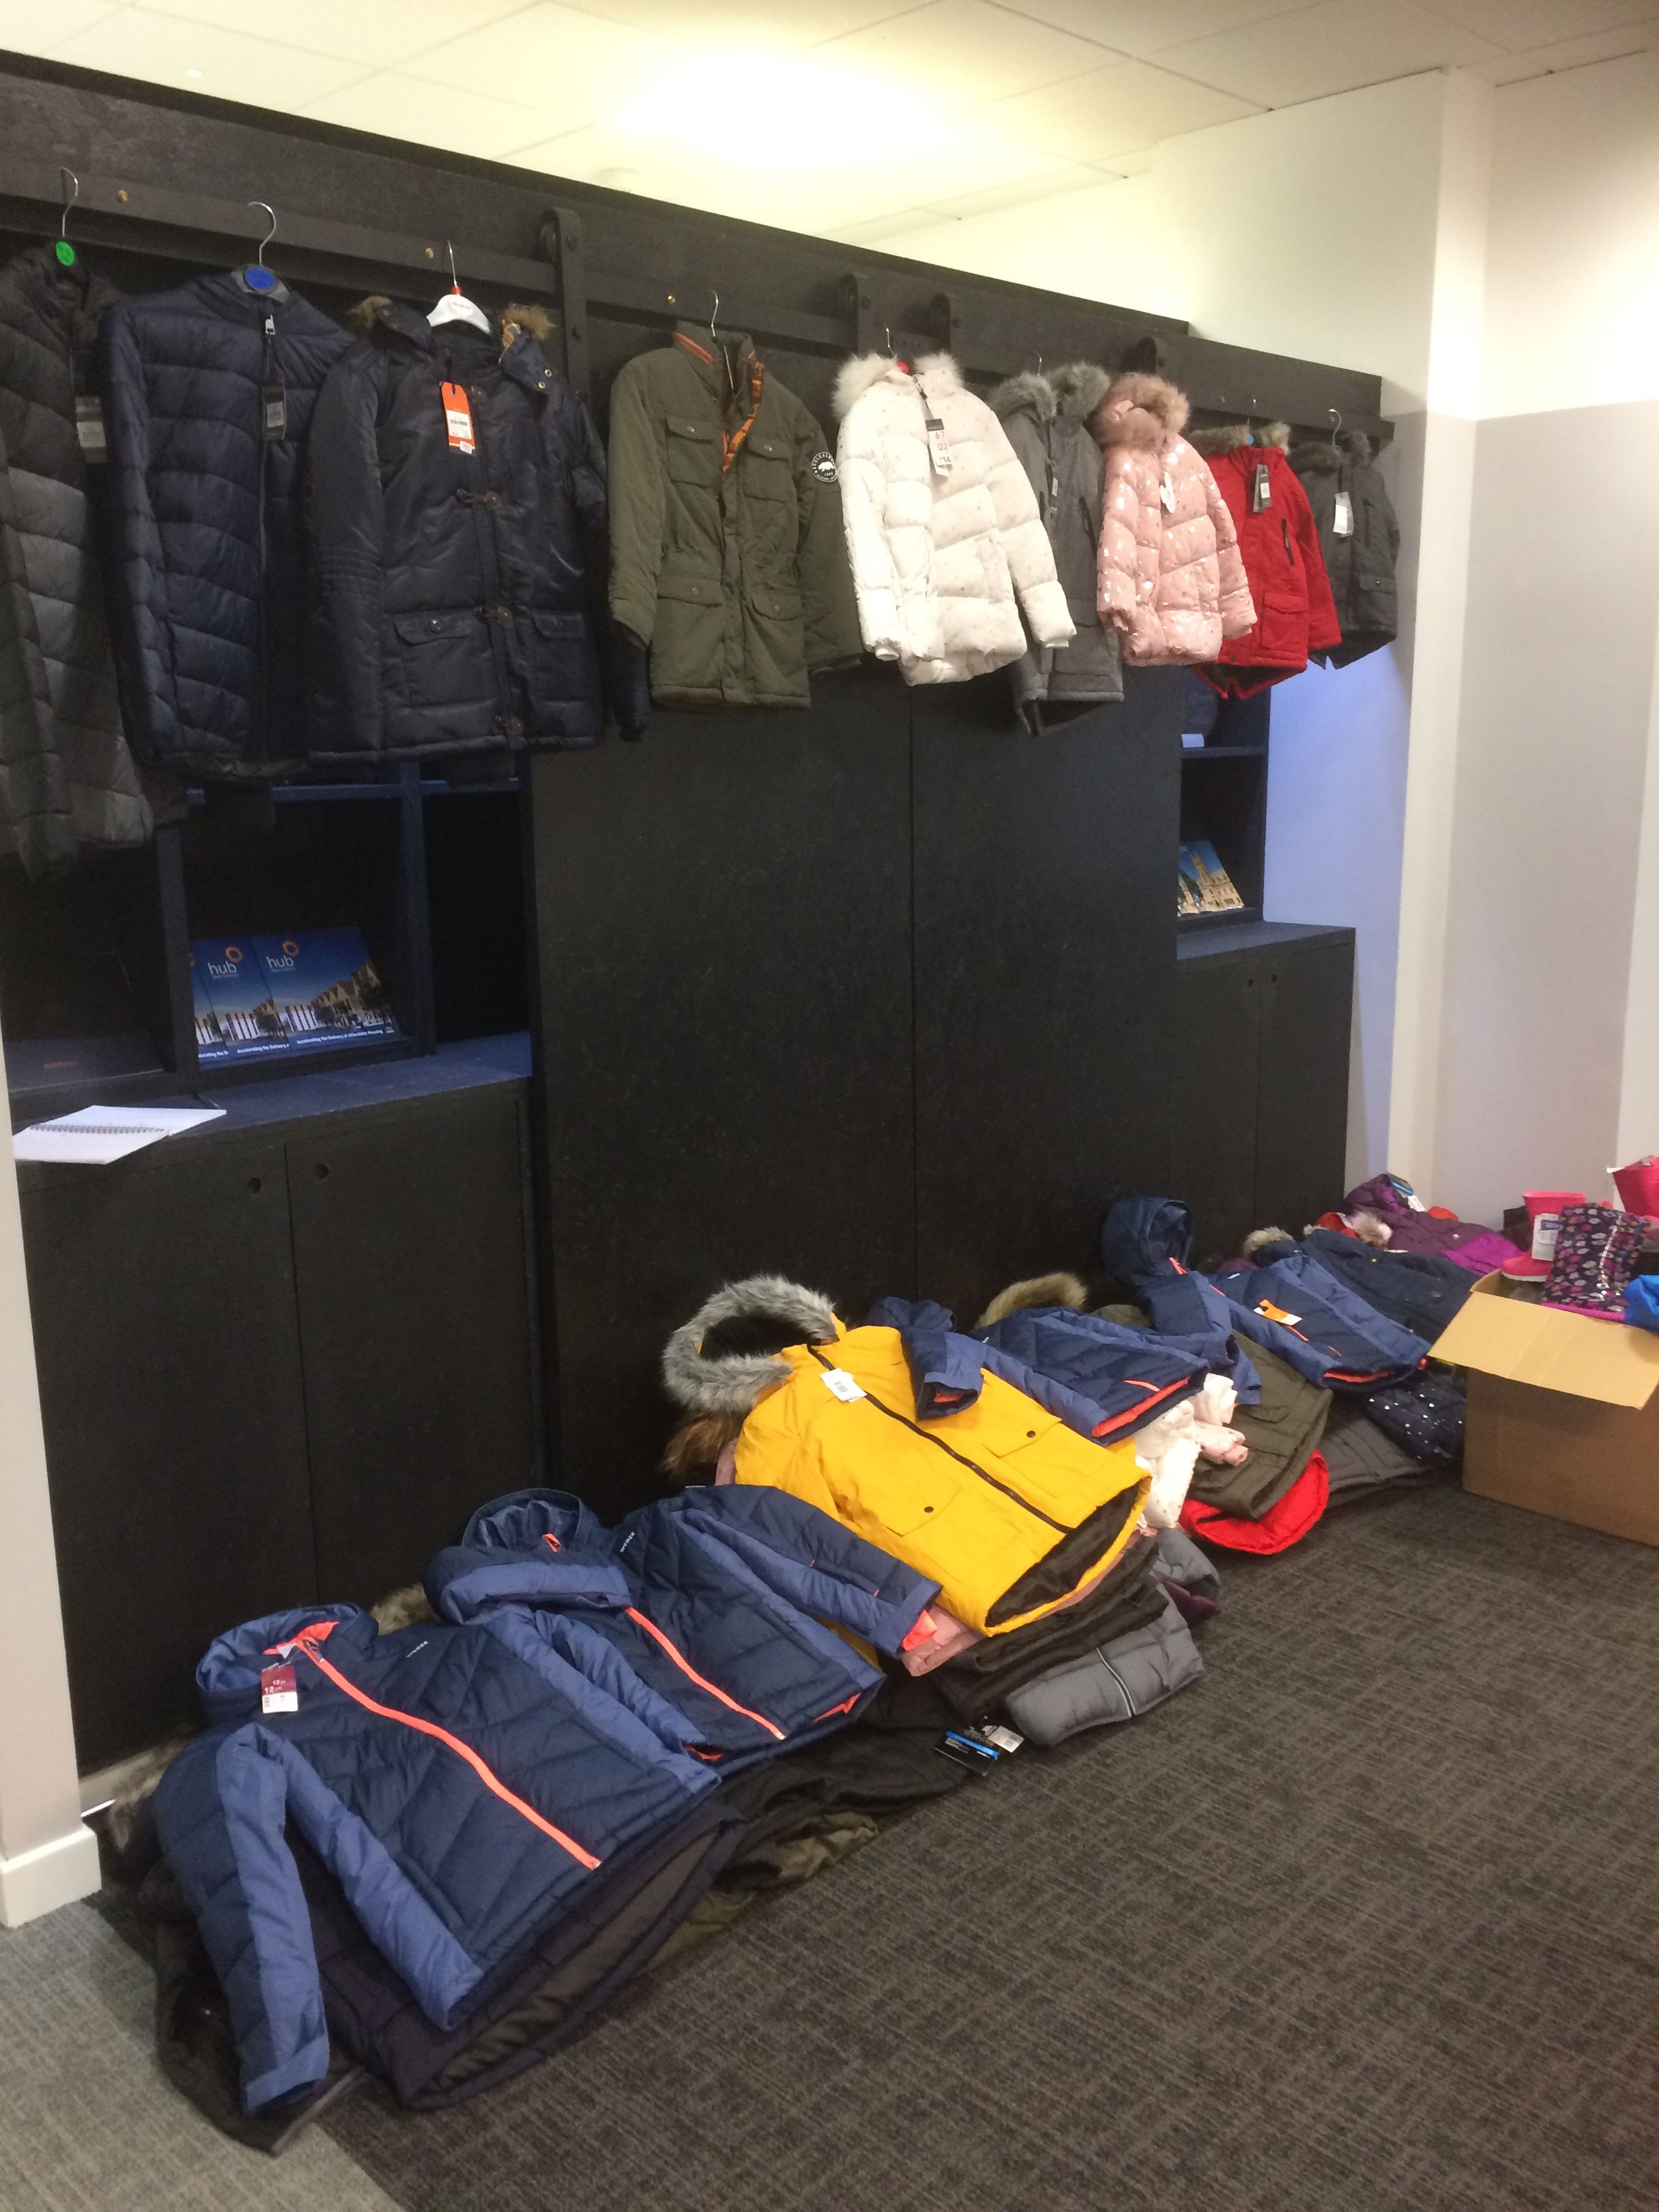 Two weeks to go: hub West Scotland in urgent call for warm winter jackets and wellies for Glasgow children living in poverty